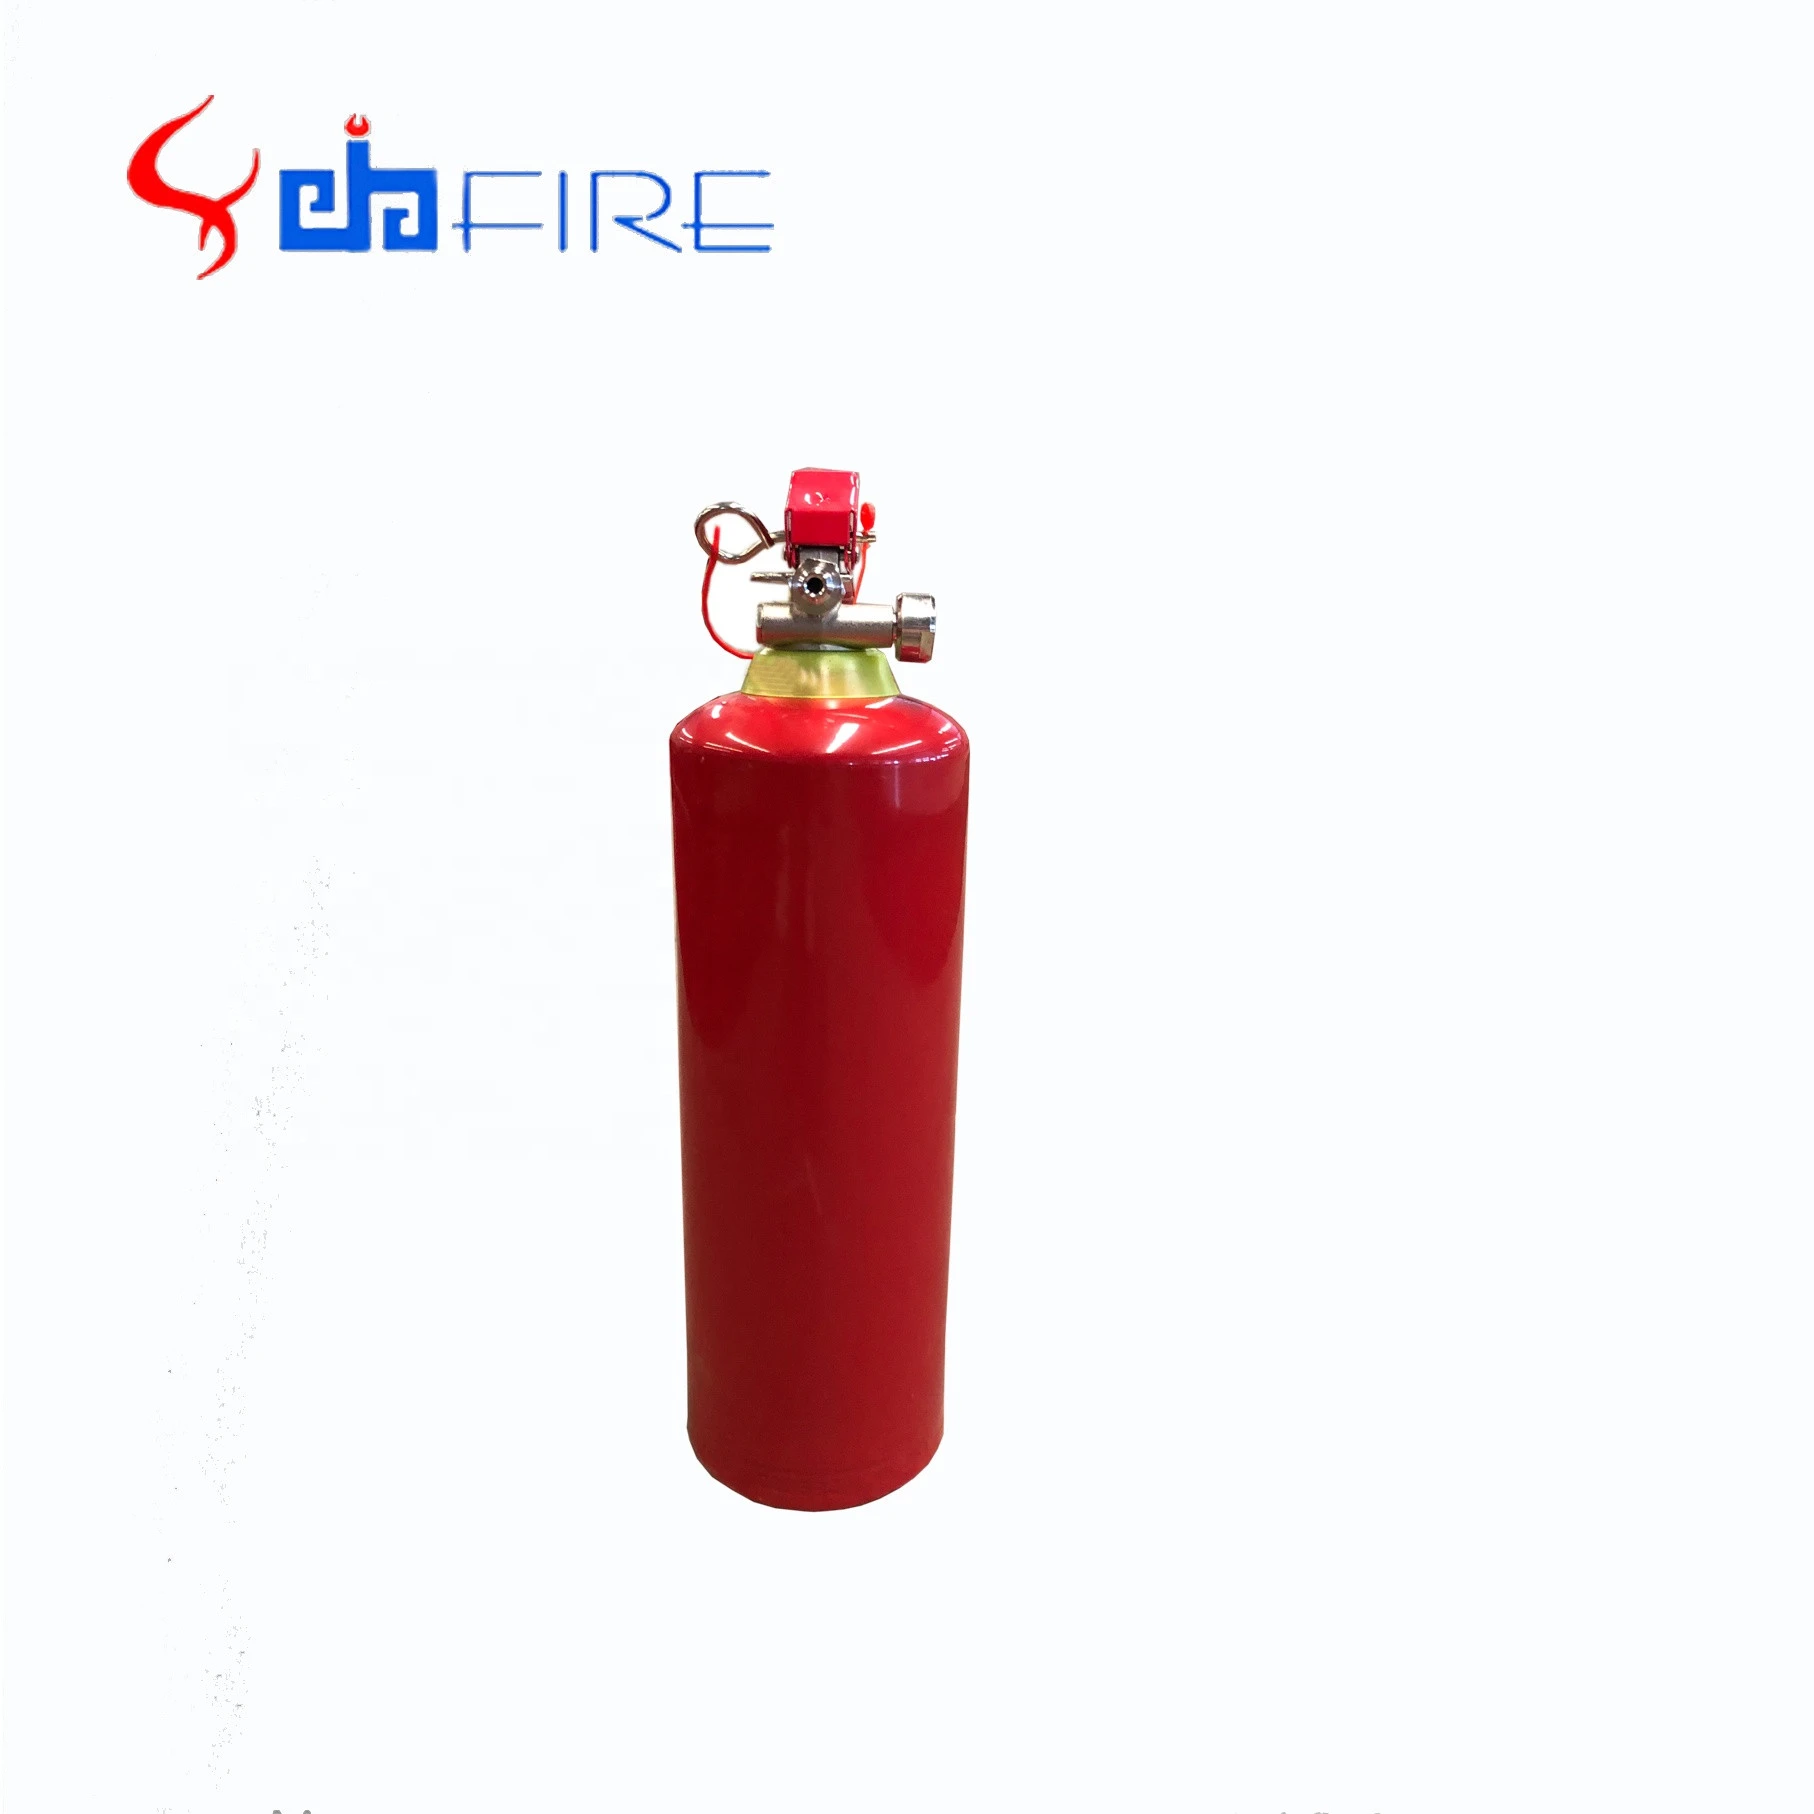 2.5kg sabs approved abc dry chemical powder empty fire extinguisher